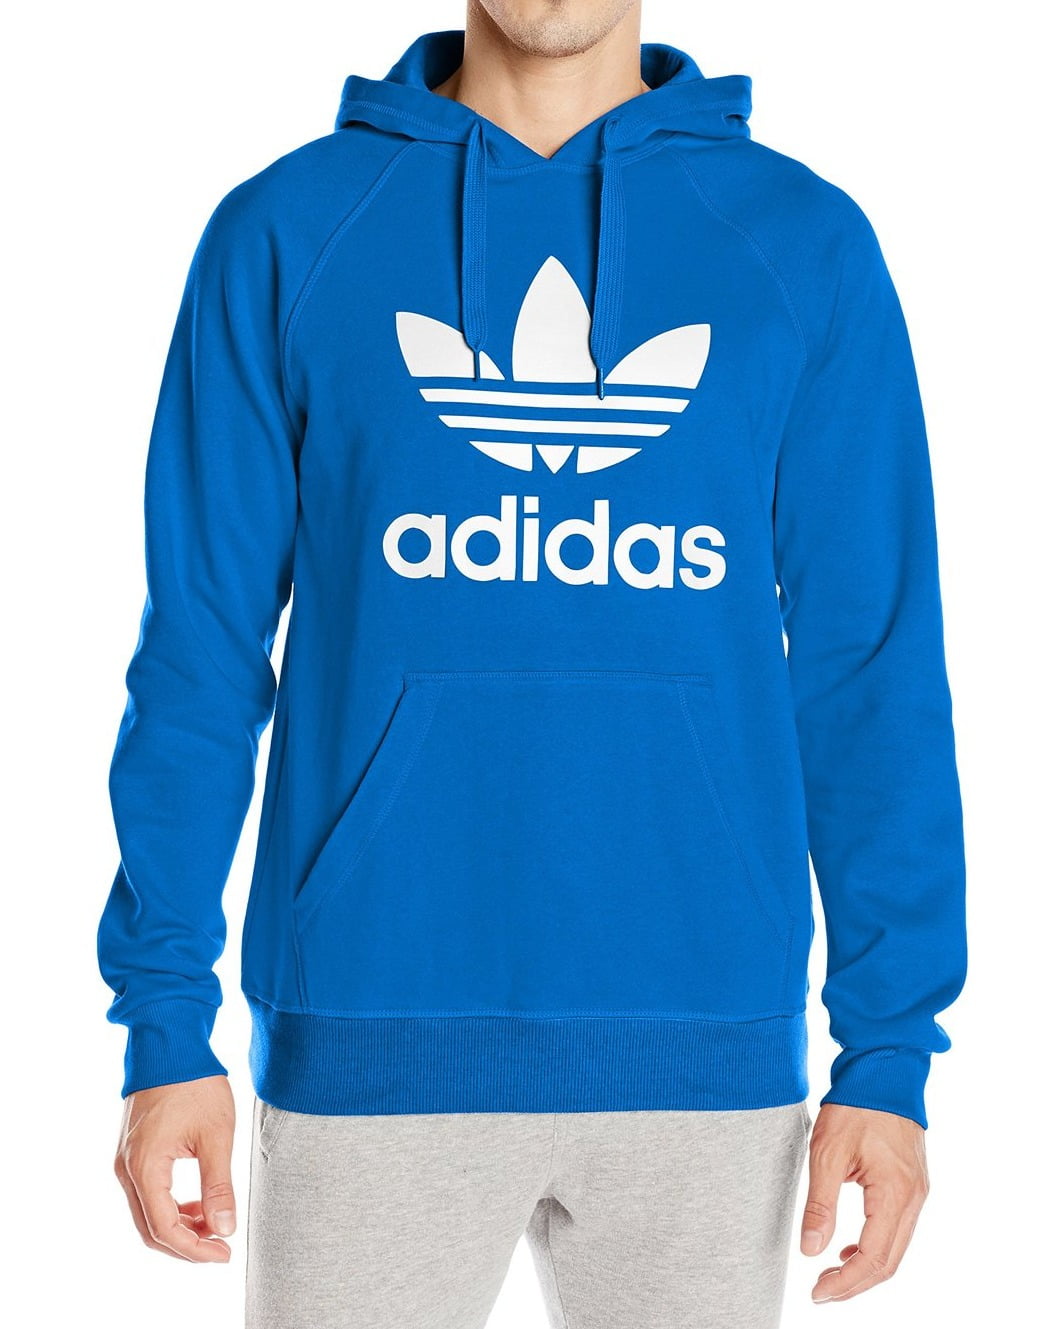 Adidas - Adidas NEW Blue Mens Size Small S Graphic Logo Pull Over